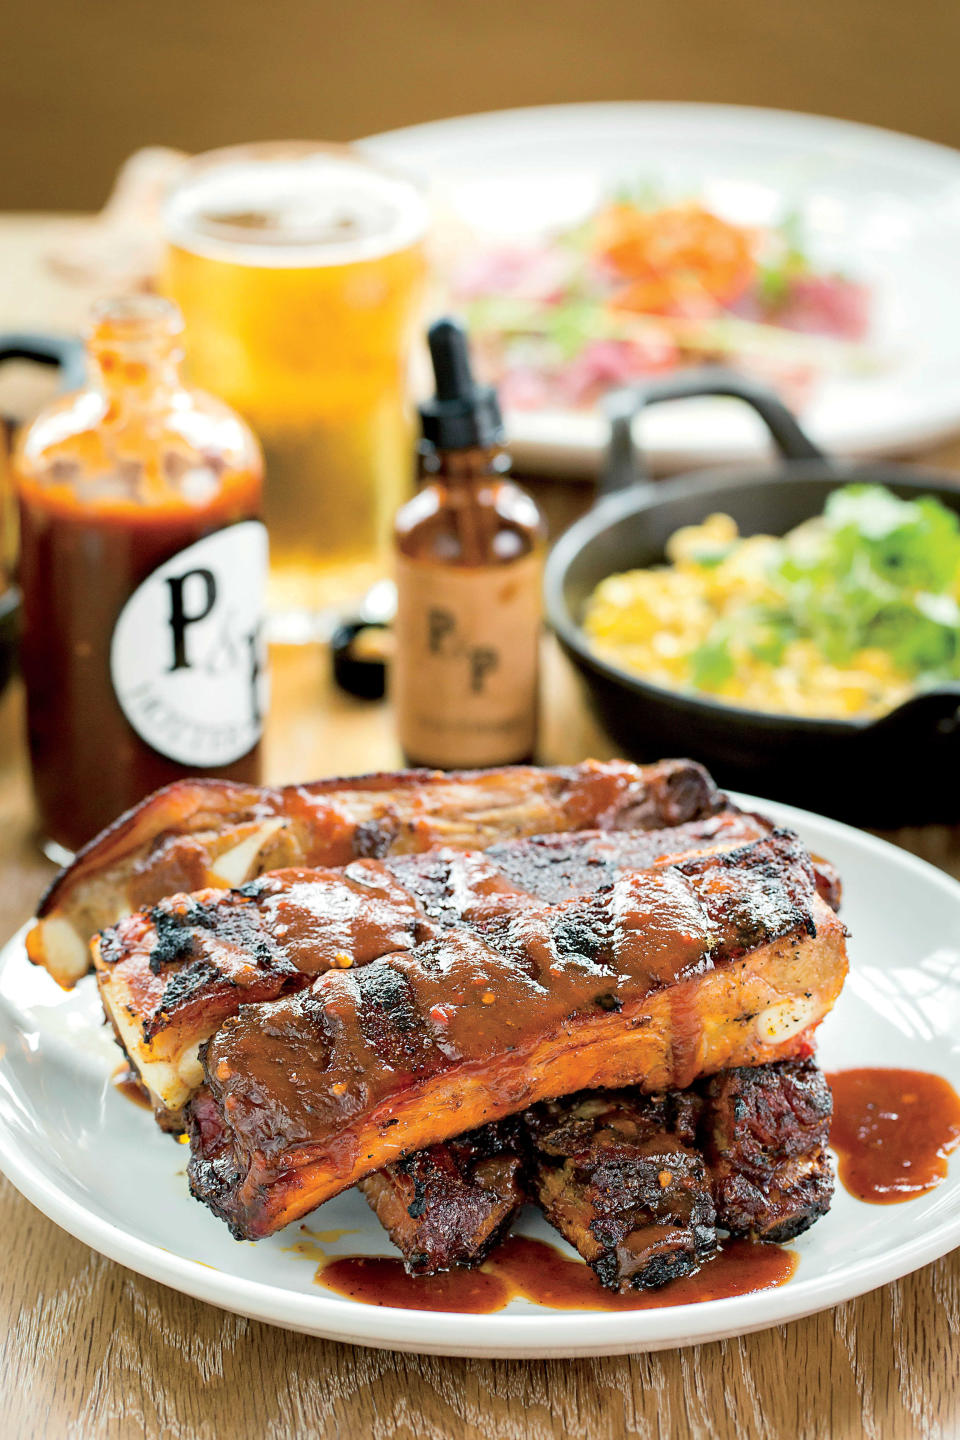 Spare Ribs at The Pig & The Pearl